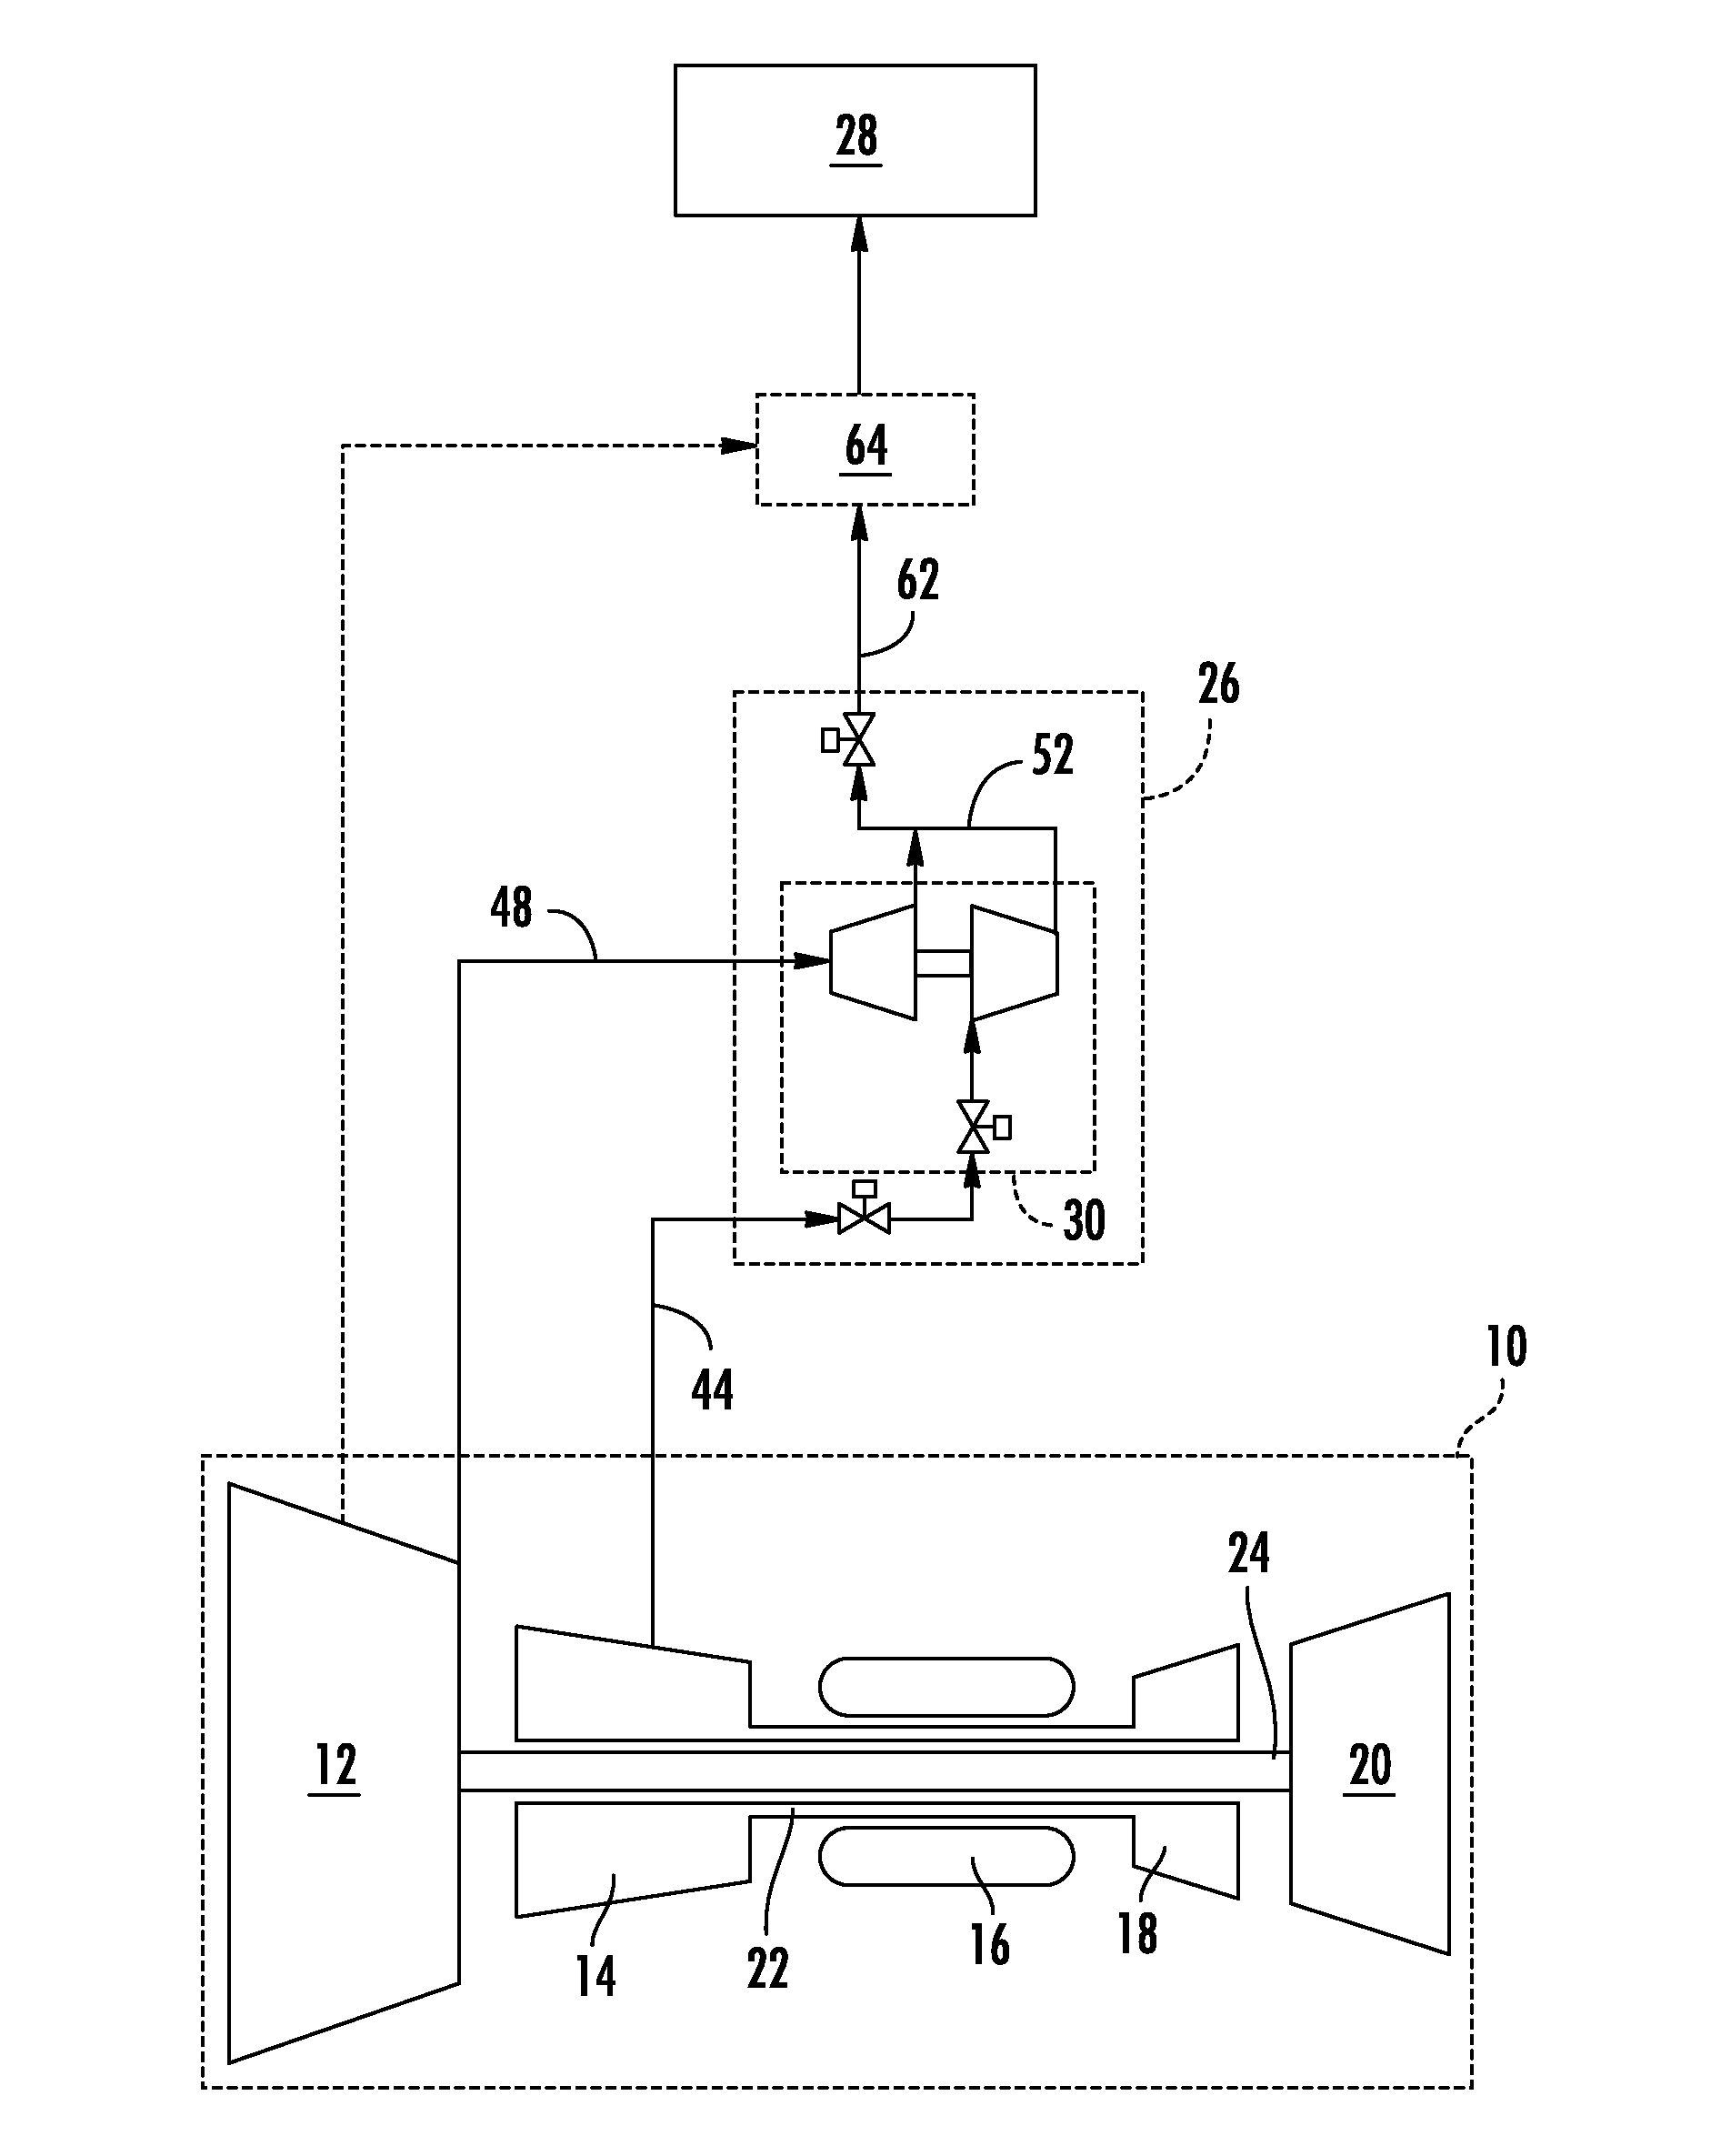 Turbine integrated bleed system and method for a gas turbine engine